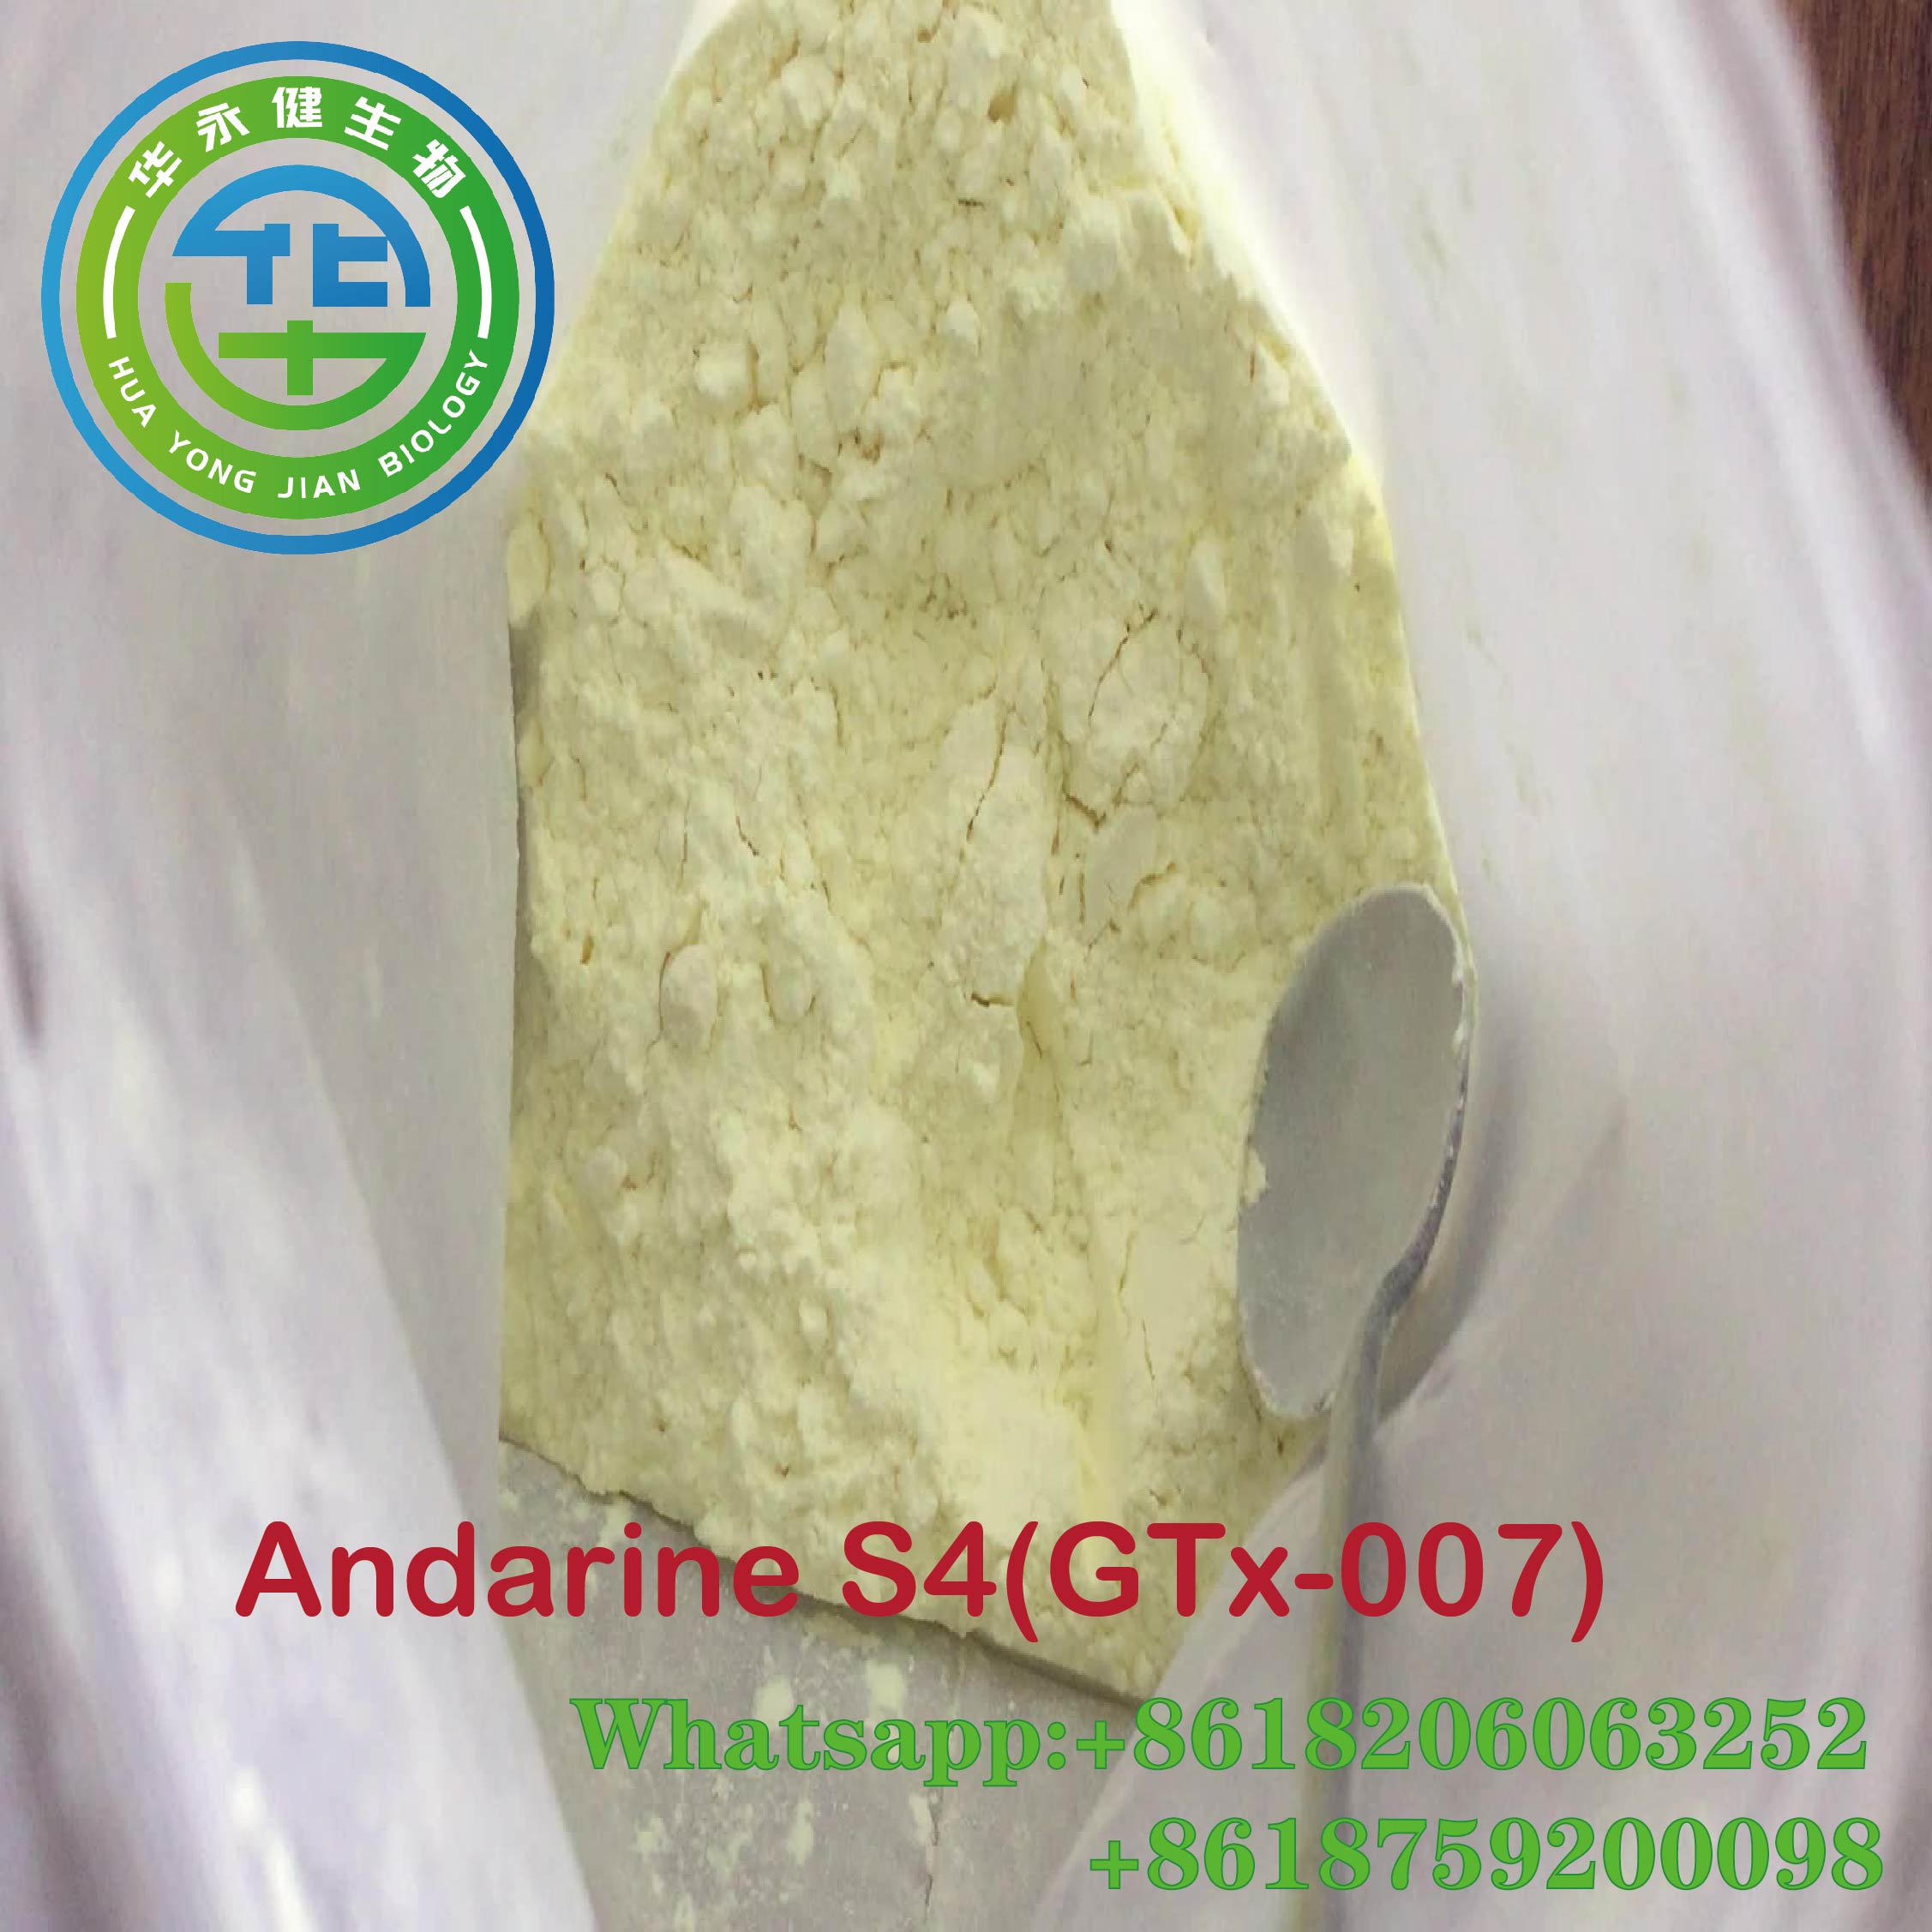  AndarineS4 Orally Sarms Raw Powder CasNO. 401900-40-1 For Effective Preventing Muscle Wasting 